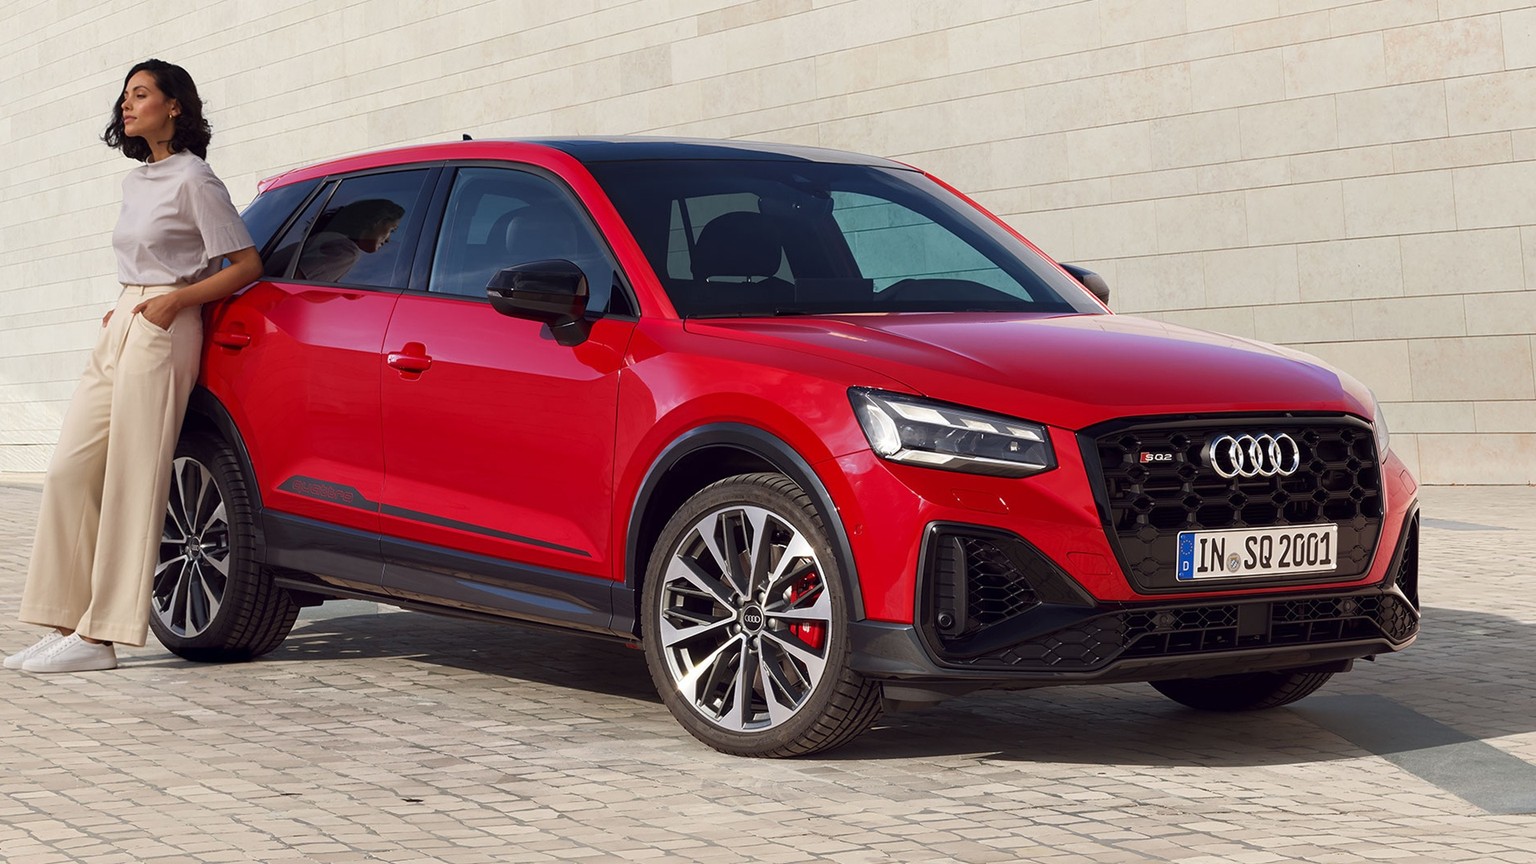 Front-side view of the Audi SQ2 with a woman leaning against the car.